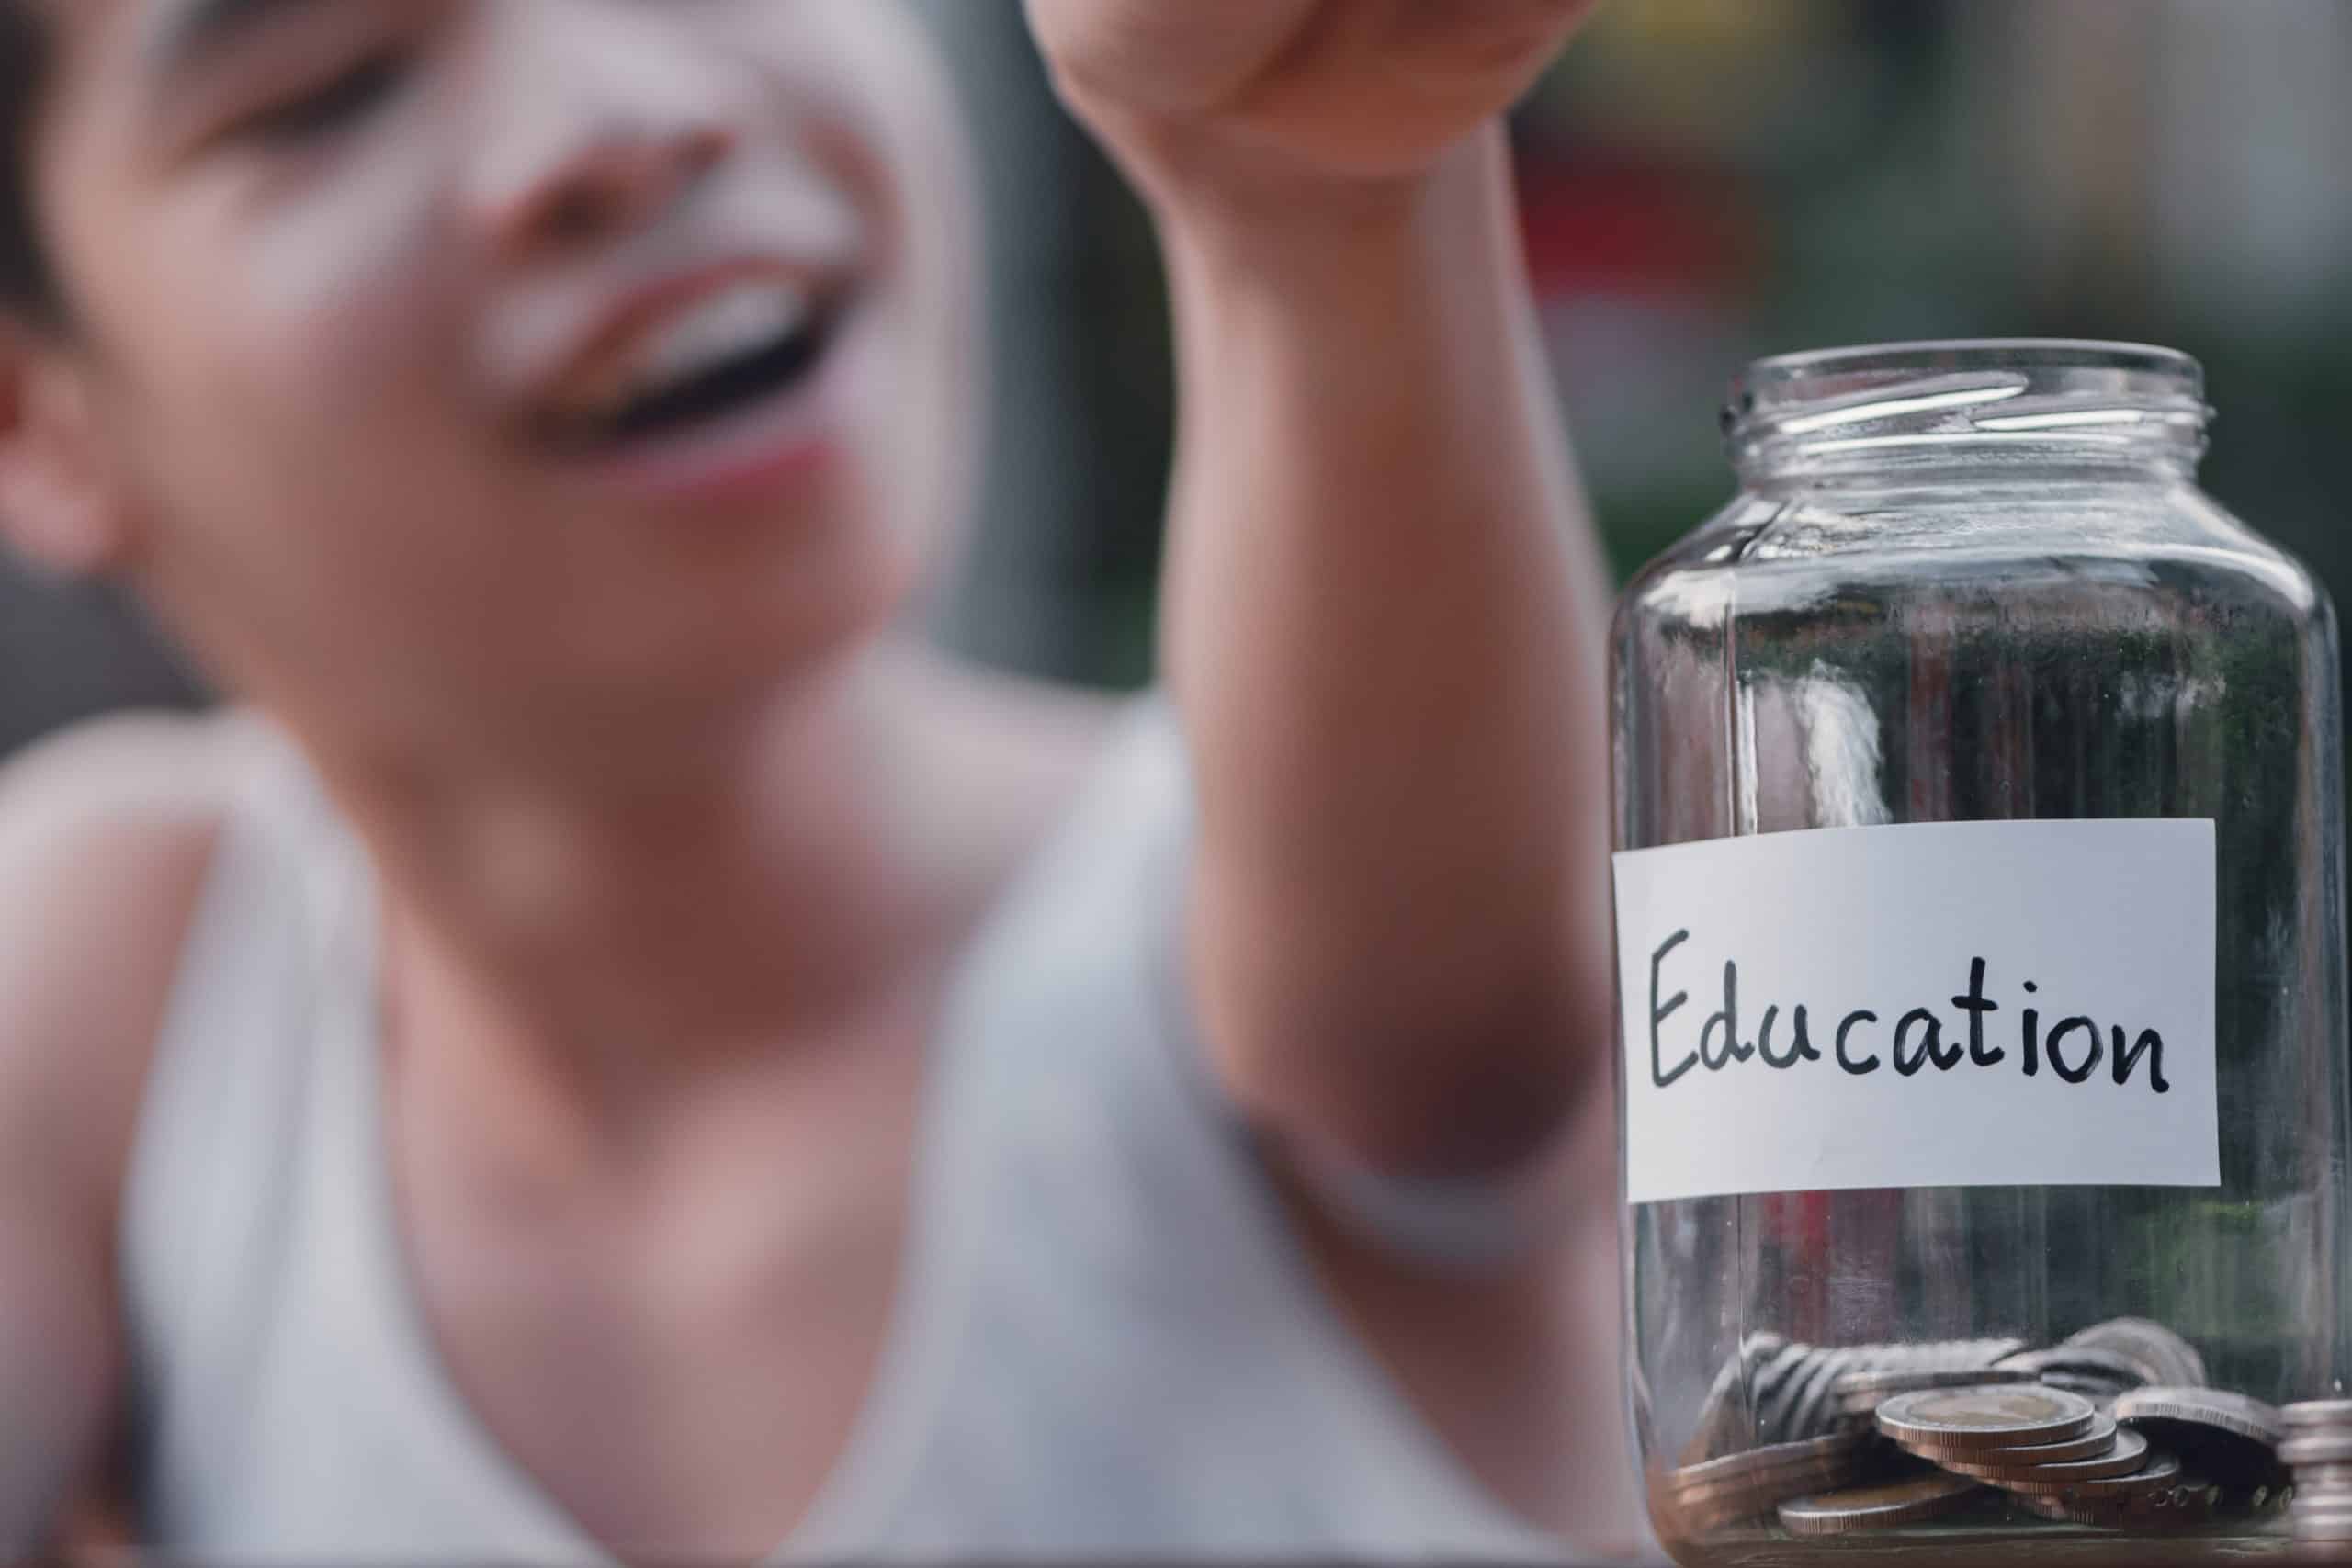 A child smiles behind a jar of coins with a label marked "Education"